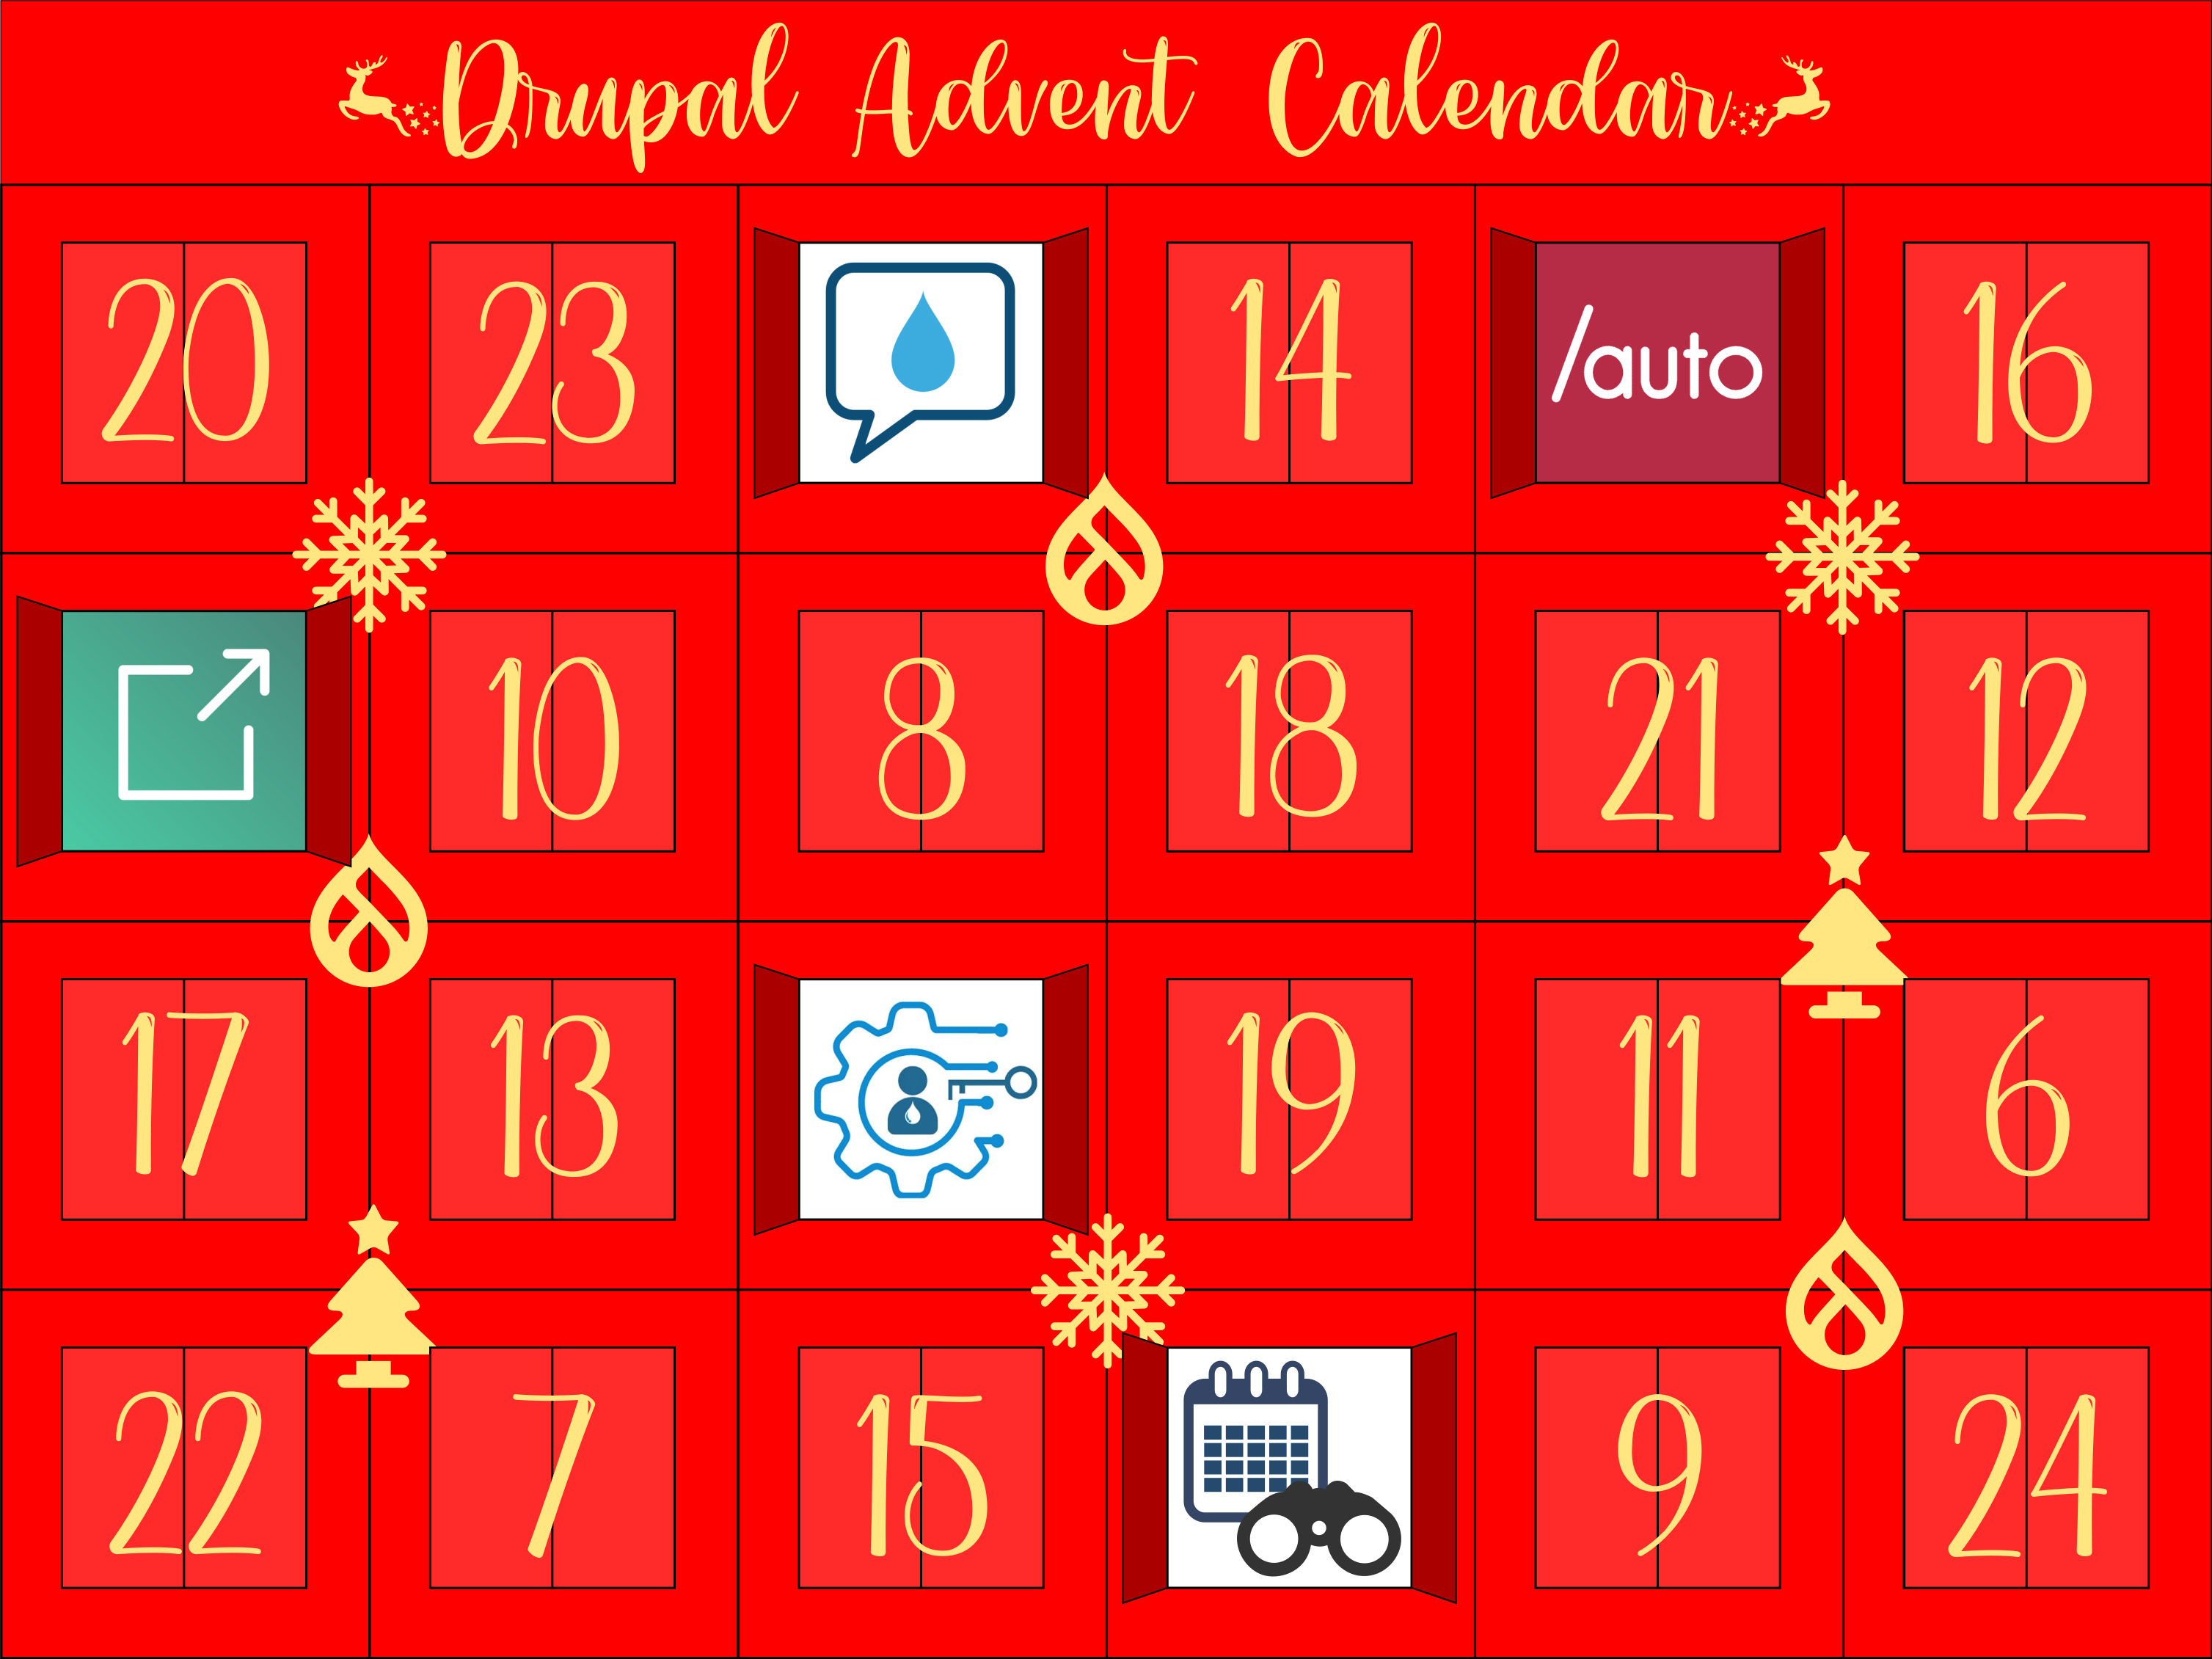 Advent Calendar with door 5 open revealing the Talking Drupal podcast